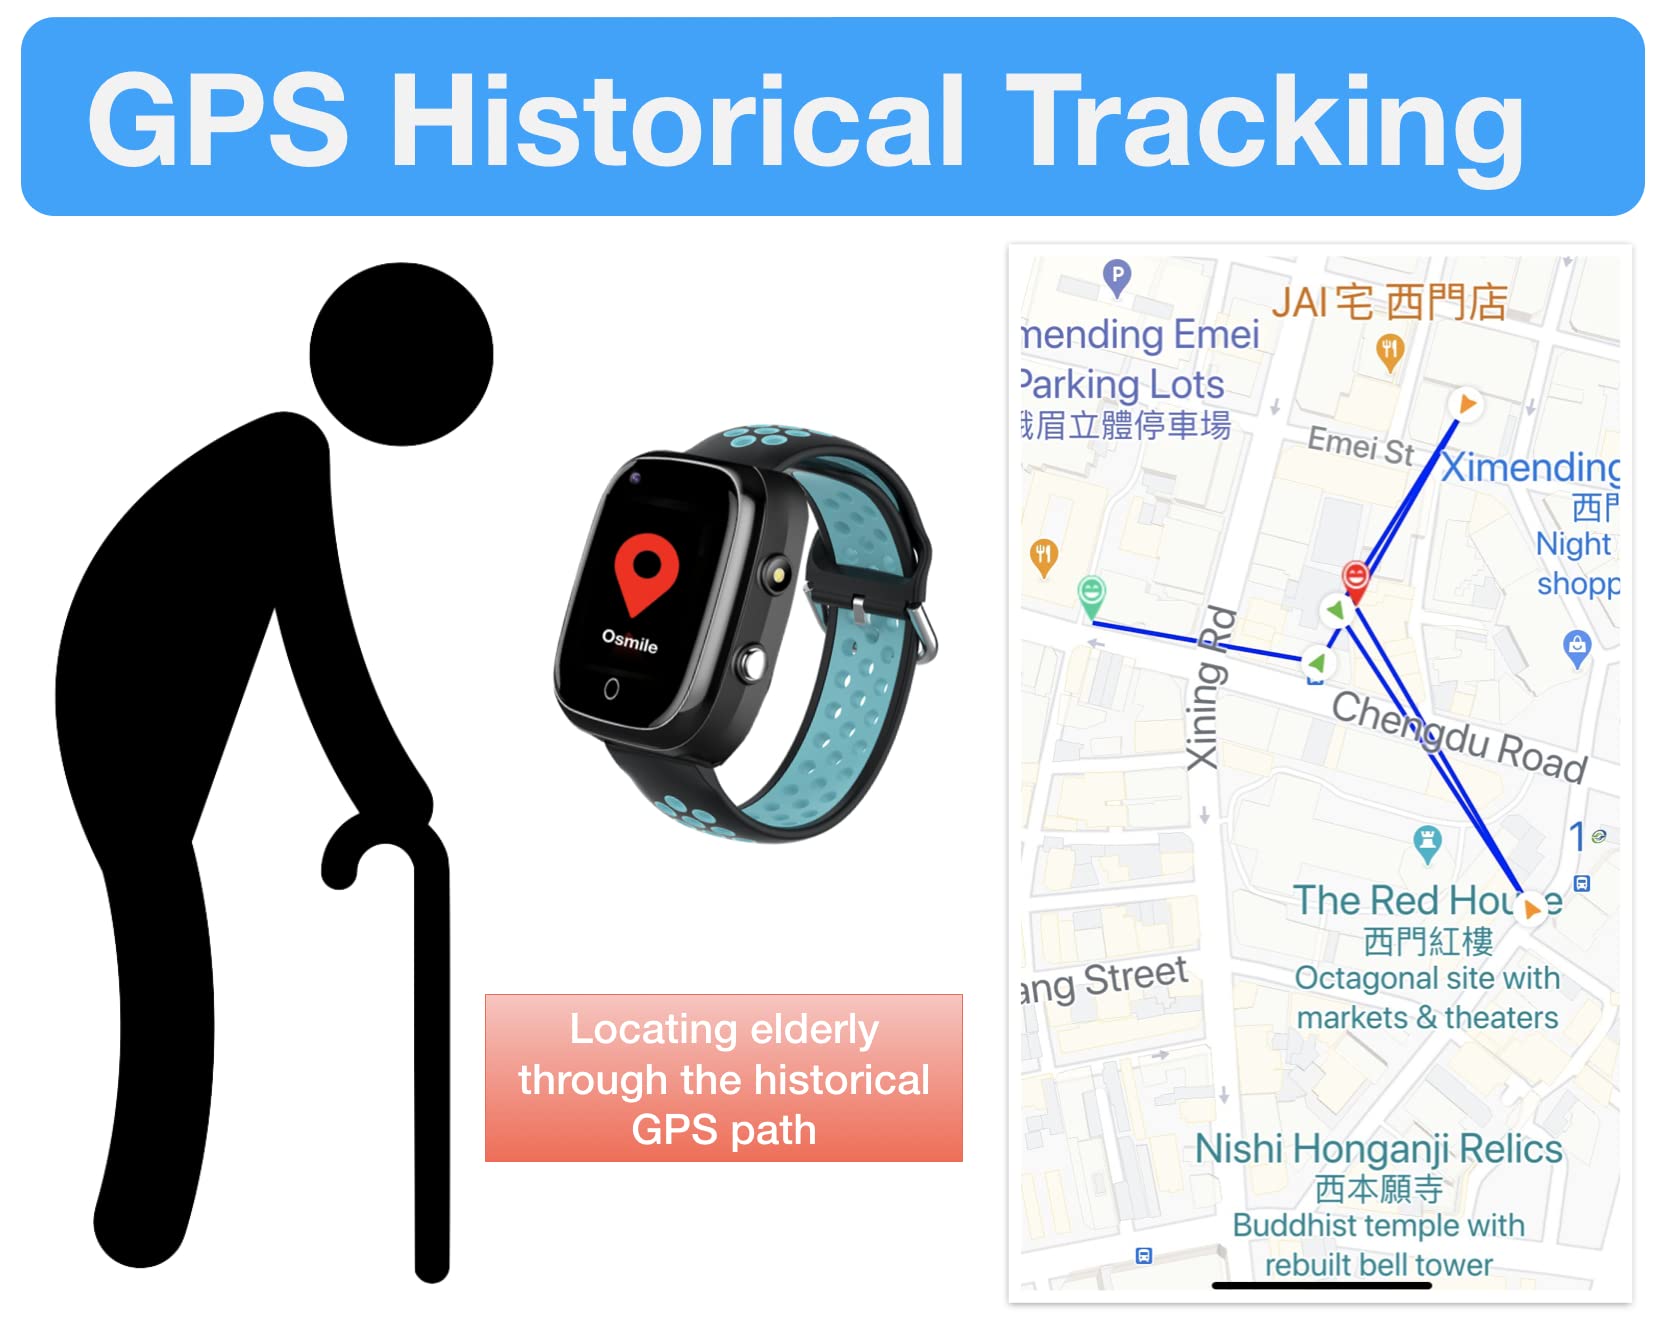 Osmile ED1000 GPS Tracker for People with Dementia, Autism, and Other Disabilities (Anti-Lost GPS Watch for Elderly & Kids with Fall Alert, SOS Button, GPS Tracking, Geo-Fencing Functions) (L)